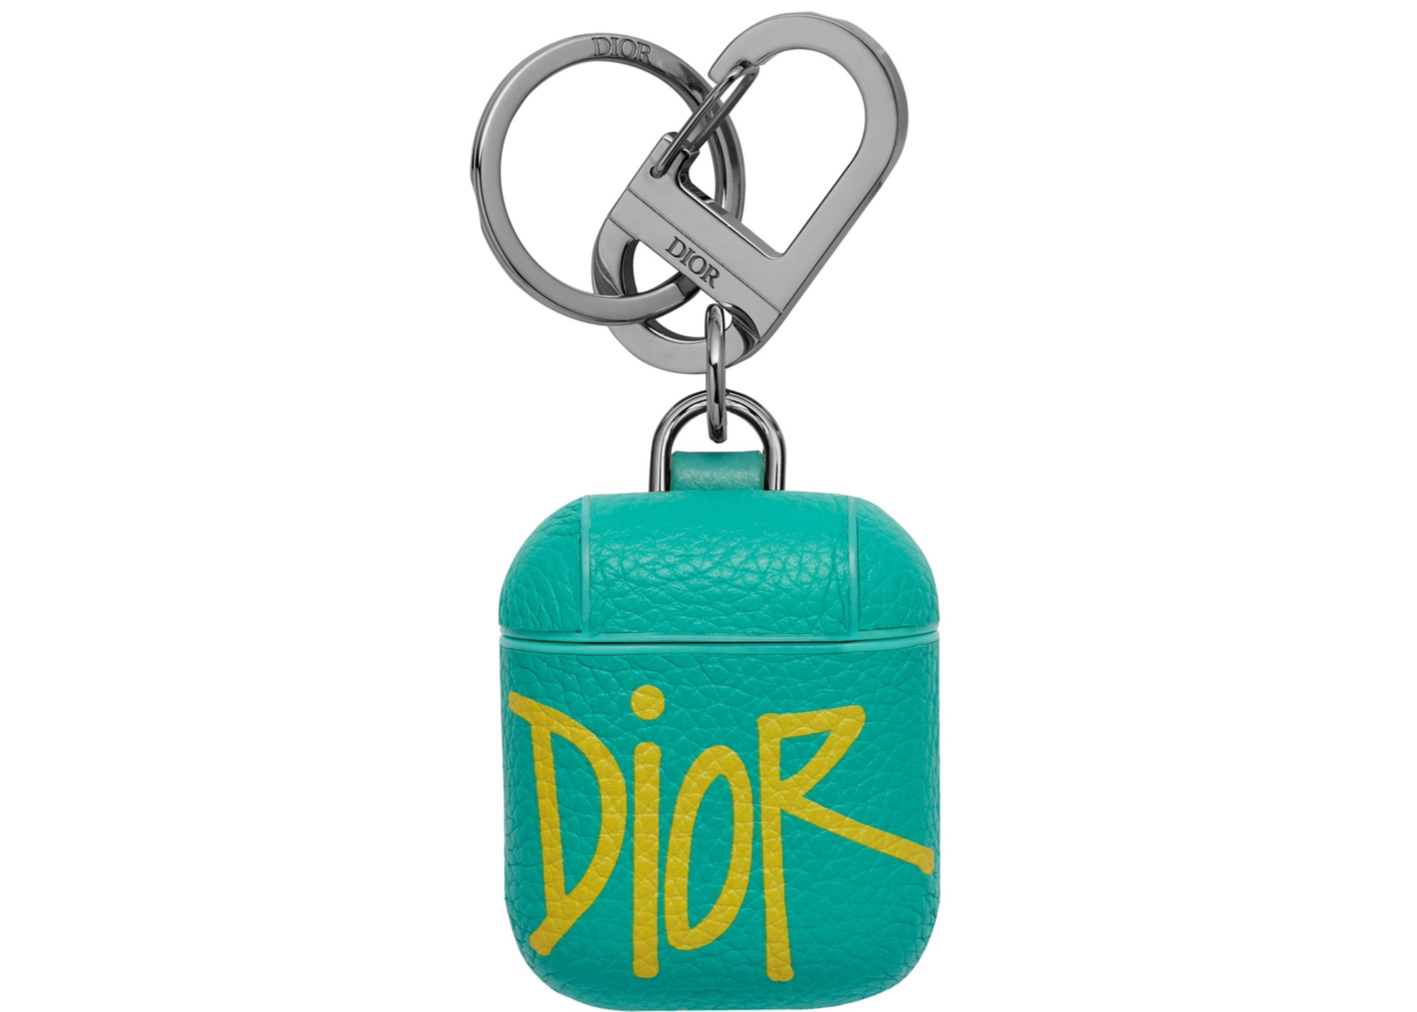 Dior Monogram Inspired AirPod Pro Case  sorrynotfame Mall